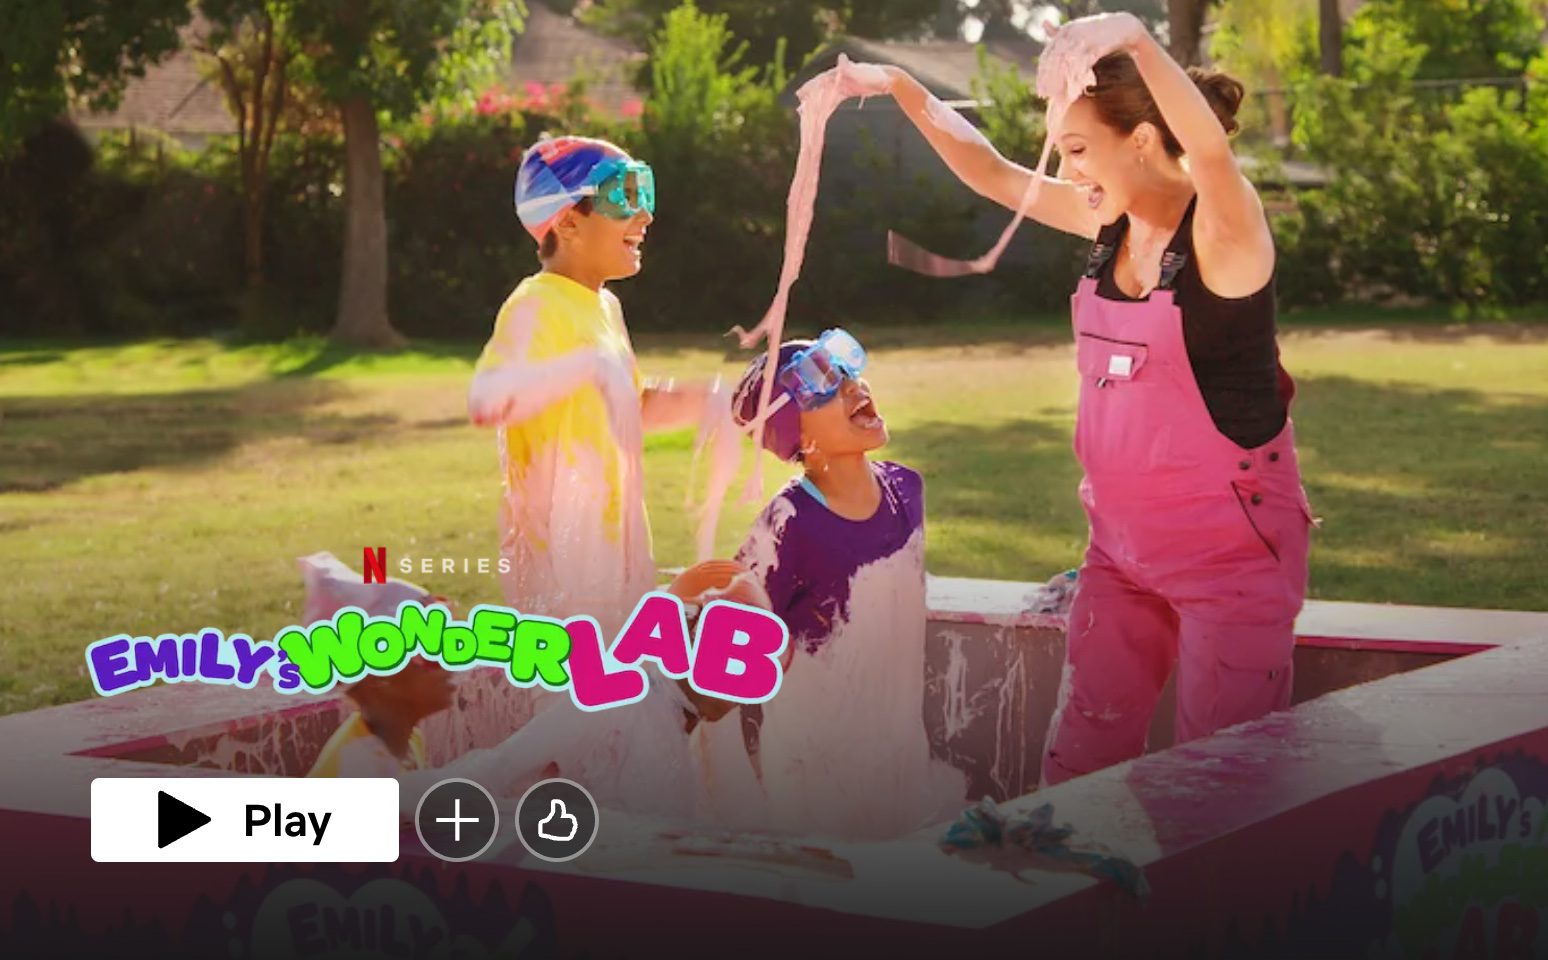 Emily's Wonder Lab screenshot as an example of educational Netflix shows